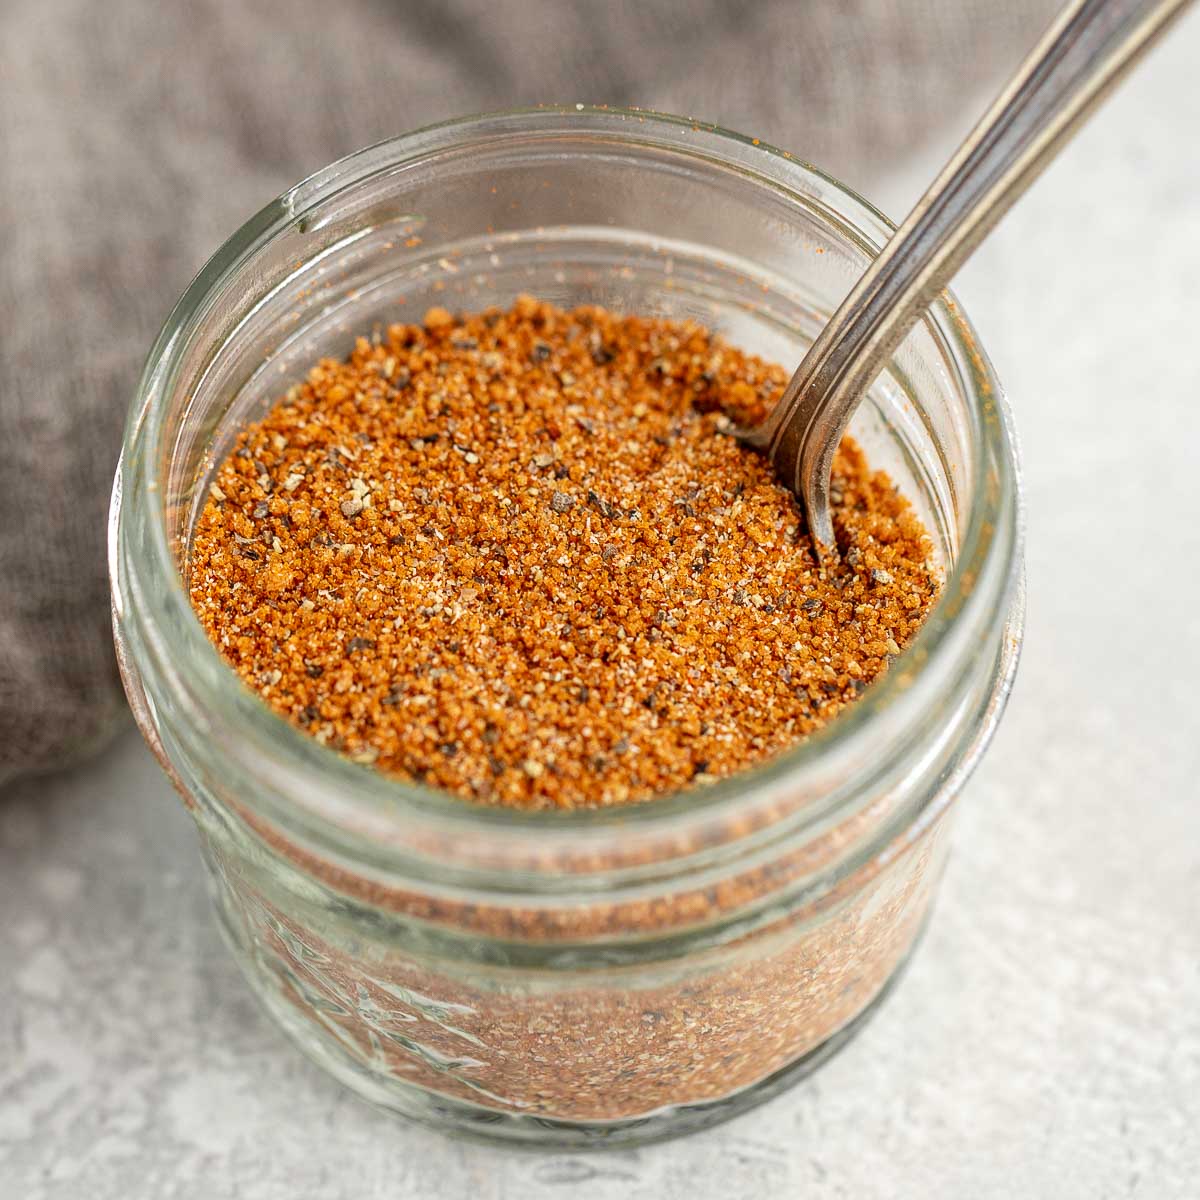 A small glass jar holding the finished bbq rub with a spoon to scoop some out.